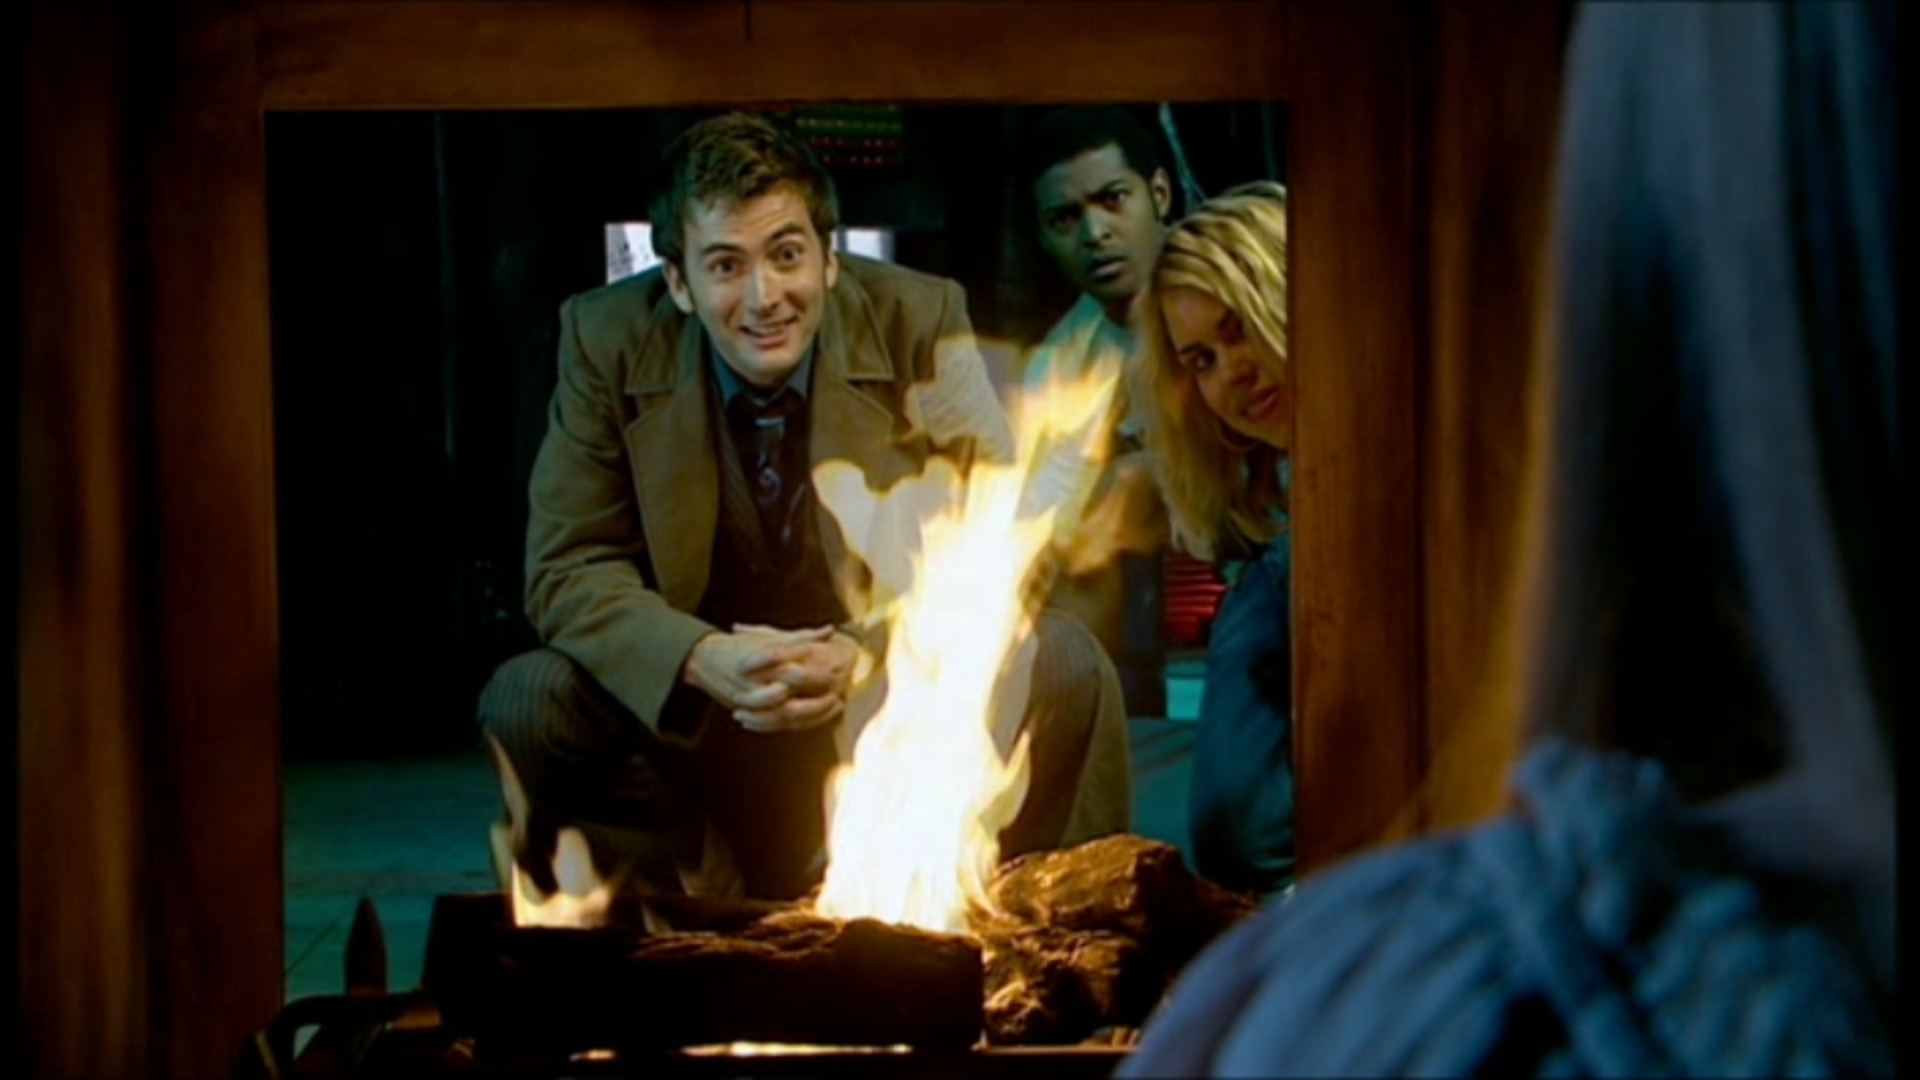 It's the Doctor! He's in a fireplace!